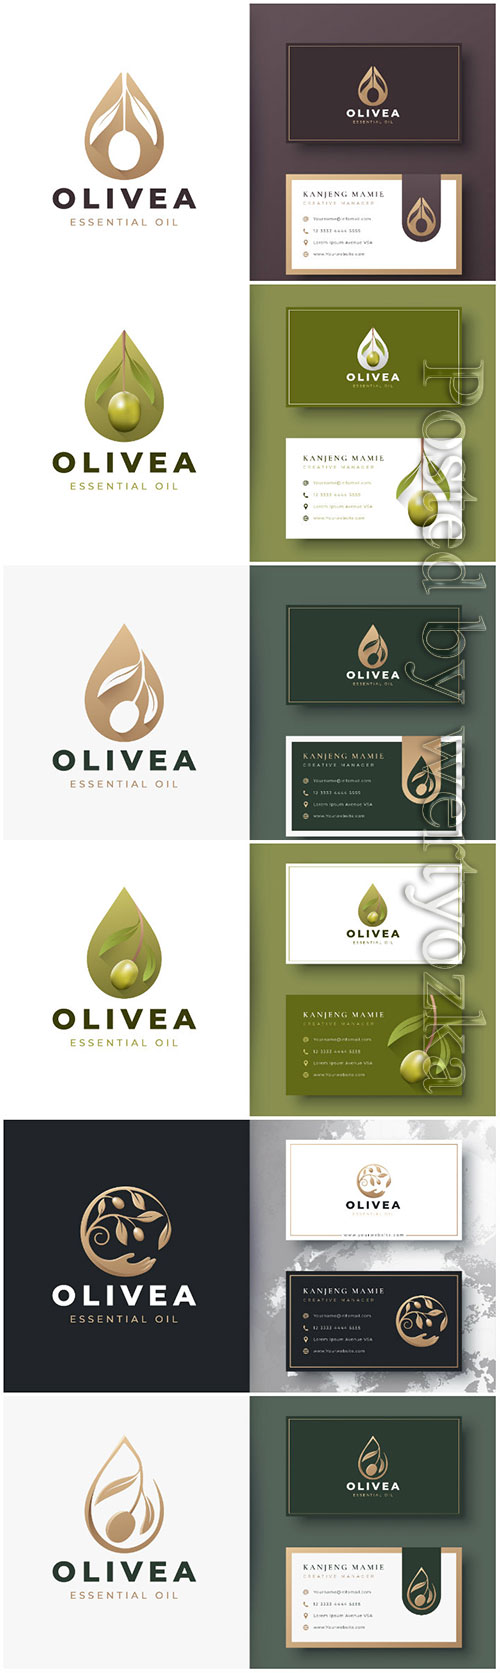 Olive oil logo and business card design premium vector